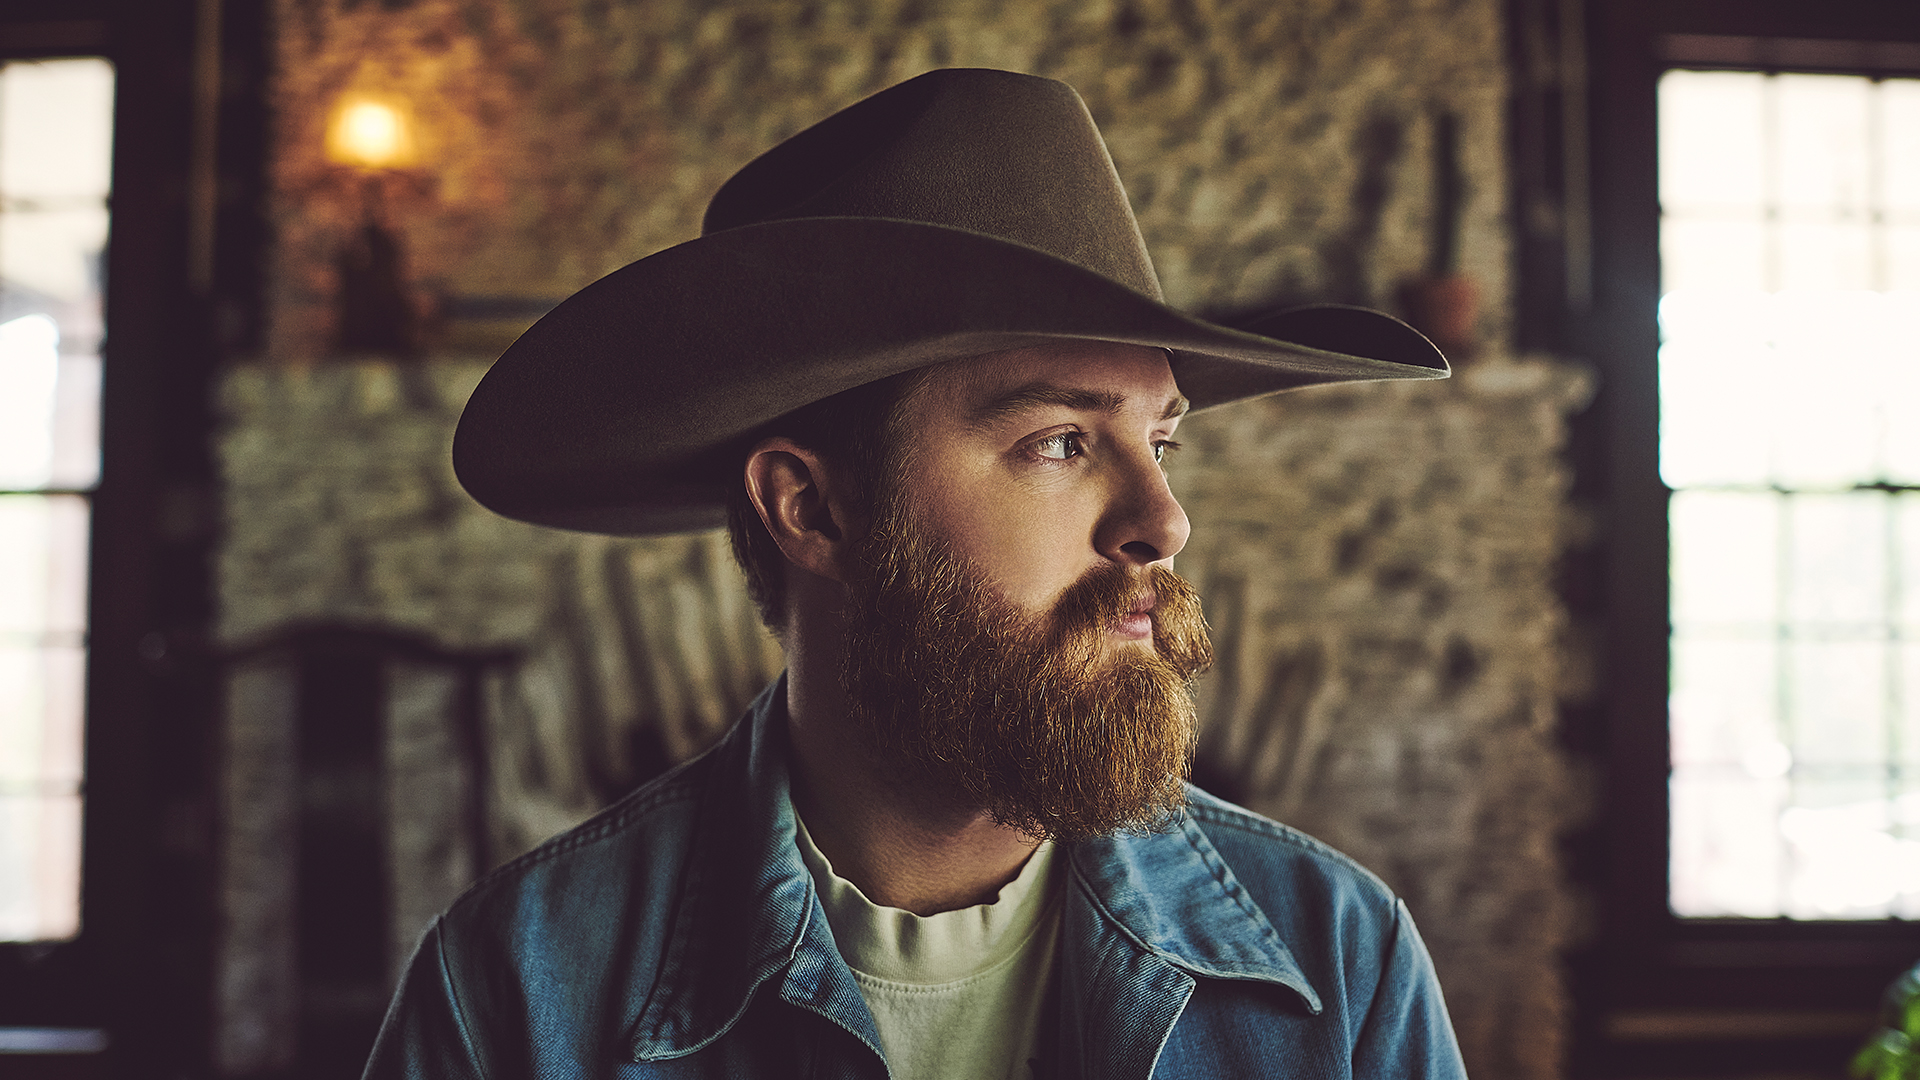 Colby Acuff, a Rising Country Star